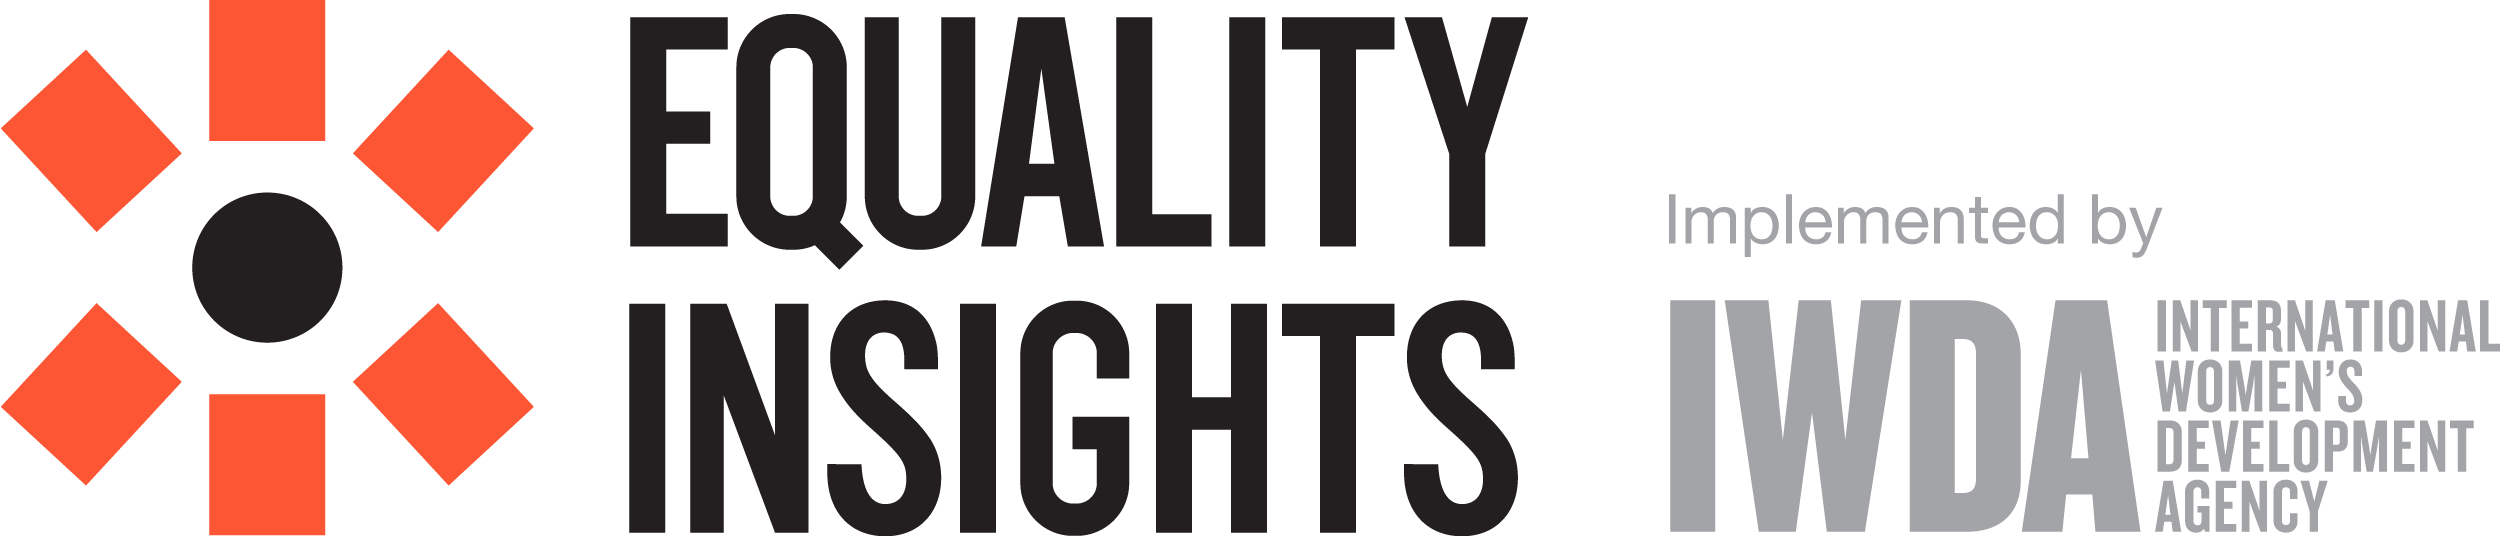 Equality Insights Logo which is an eye with a black centre and orange squares around it